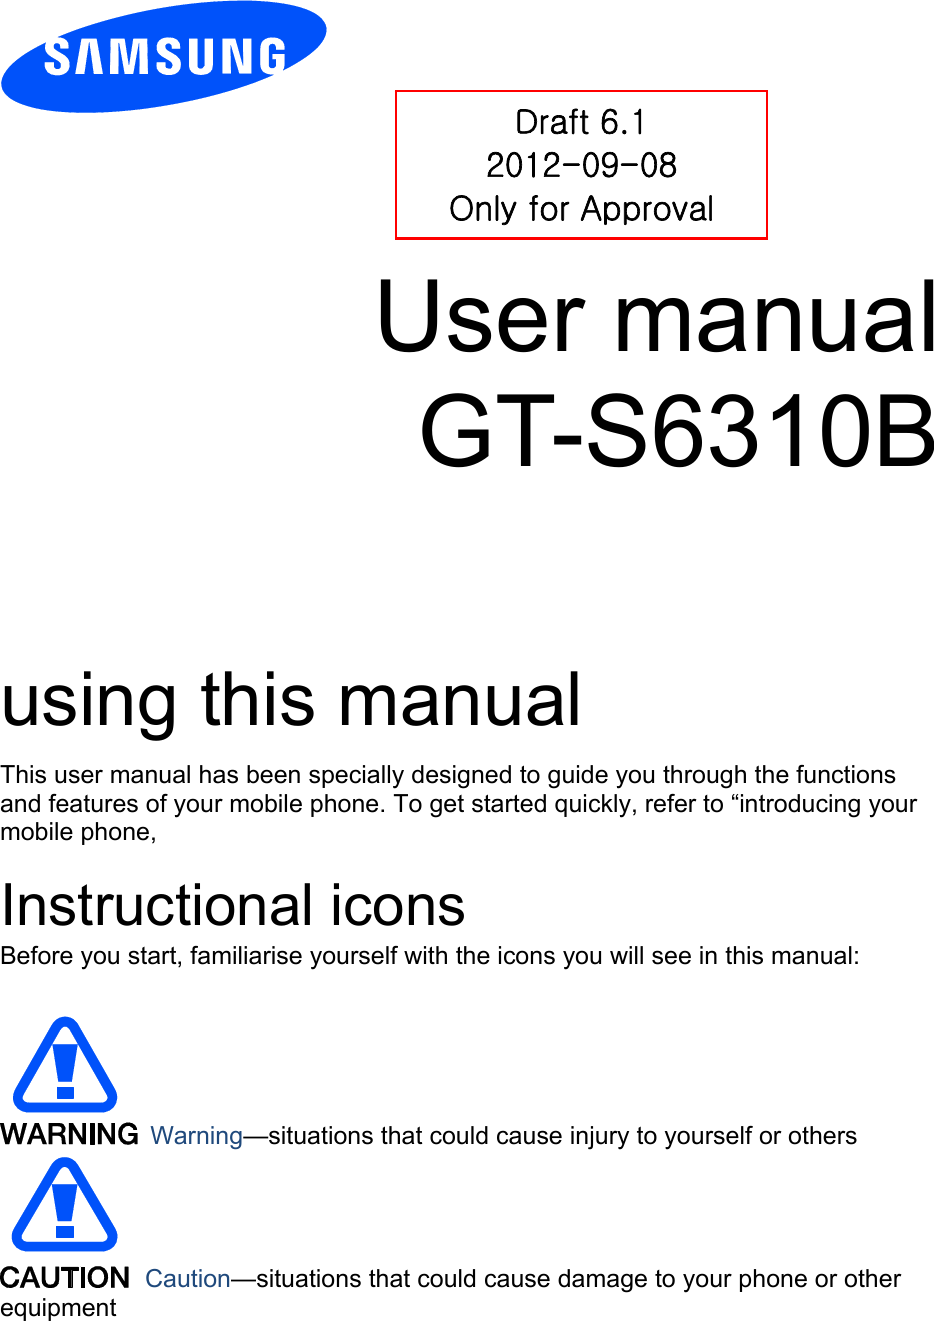          User manual GT-S6310B        using this manual This user manual has been specially designed to guide you through the functions and features of your mobile phone. To get started quickly, refer to “introducing your mobile phone,  Instructional icons Before you start, familiarise yourself with the icons you will see in this manual:     Warning—situations that could cause injury to yourself or others  Caution—situations that could cause damage to your phone or other equipment Draft 6.1 2012-09-08 Only for Approval 